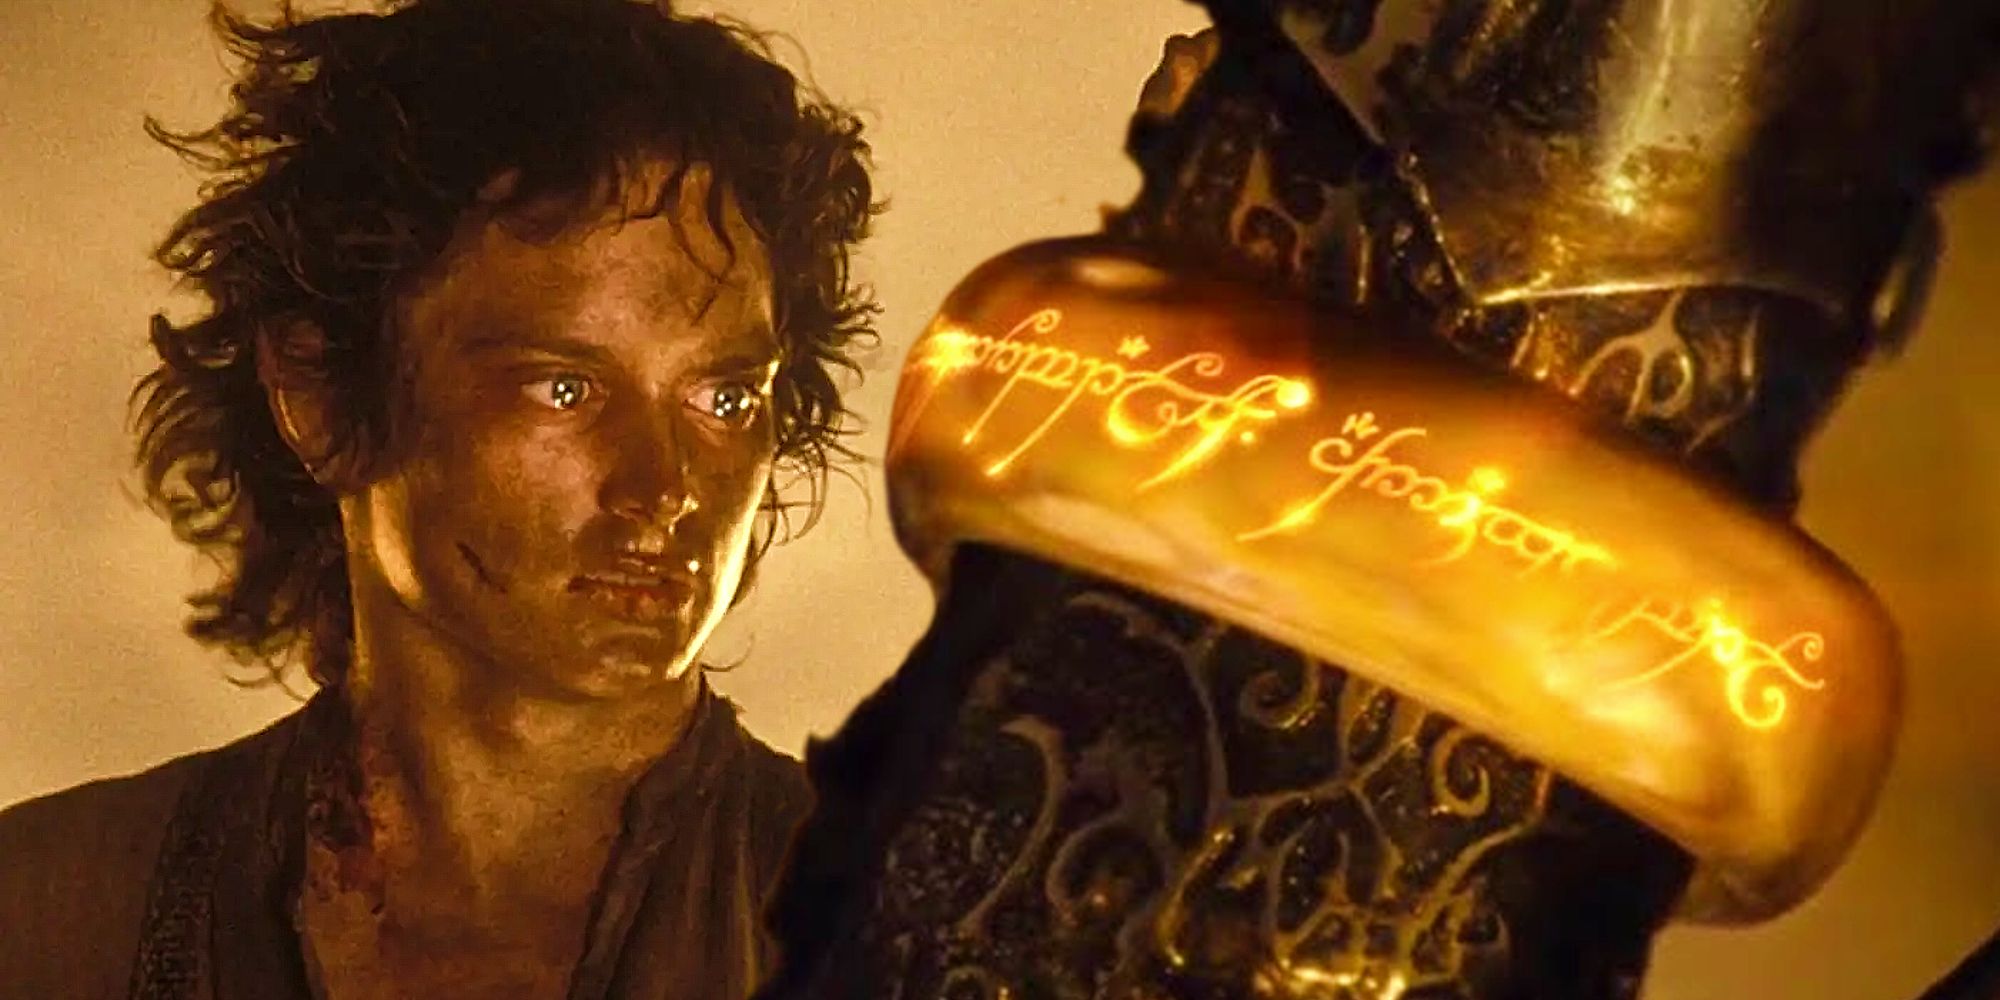 The One Ring from The Lord of the Rings next to Frodo Baggins in Mount Doom